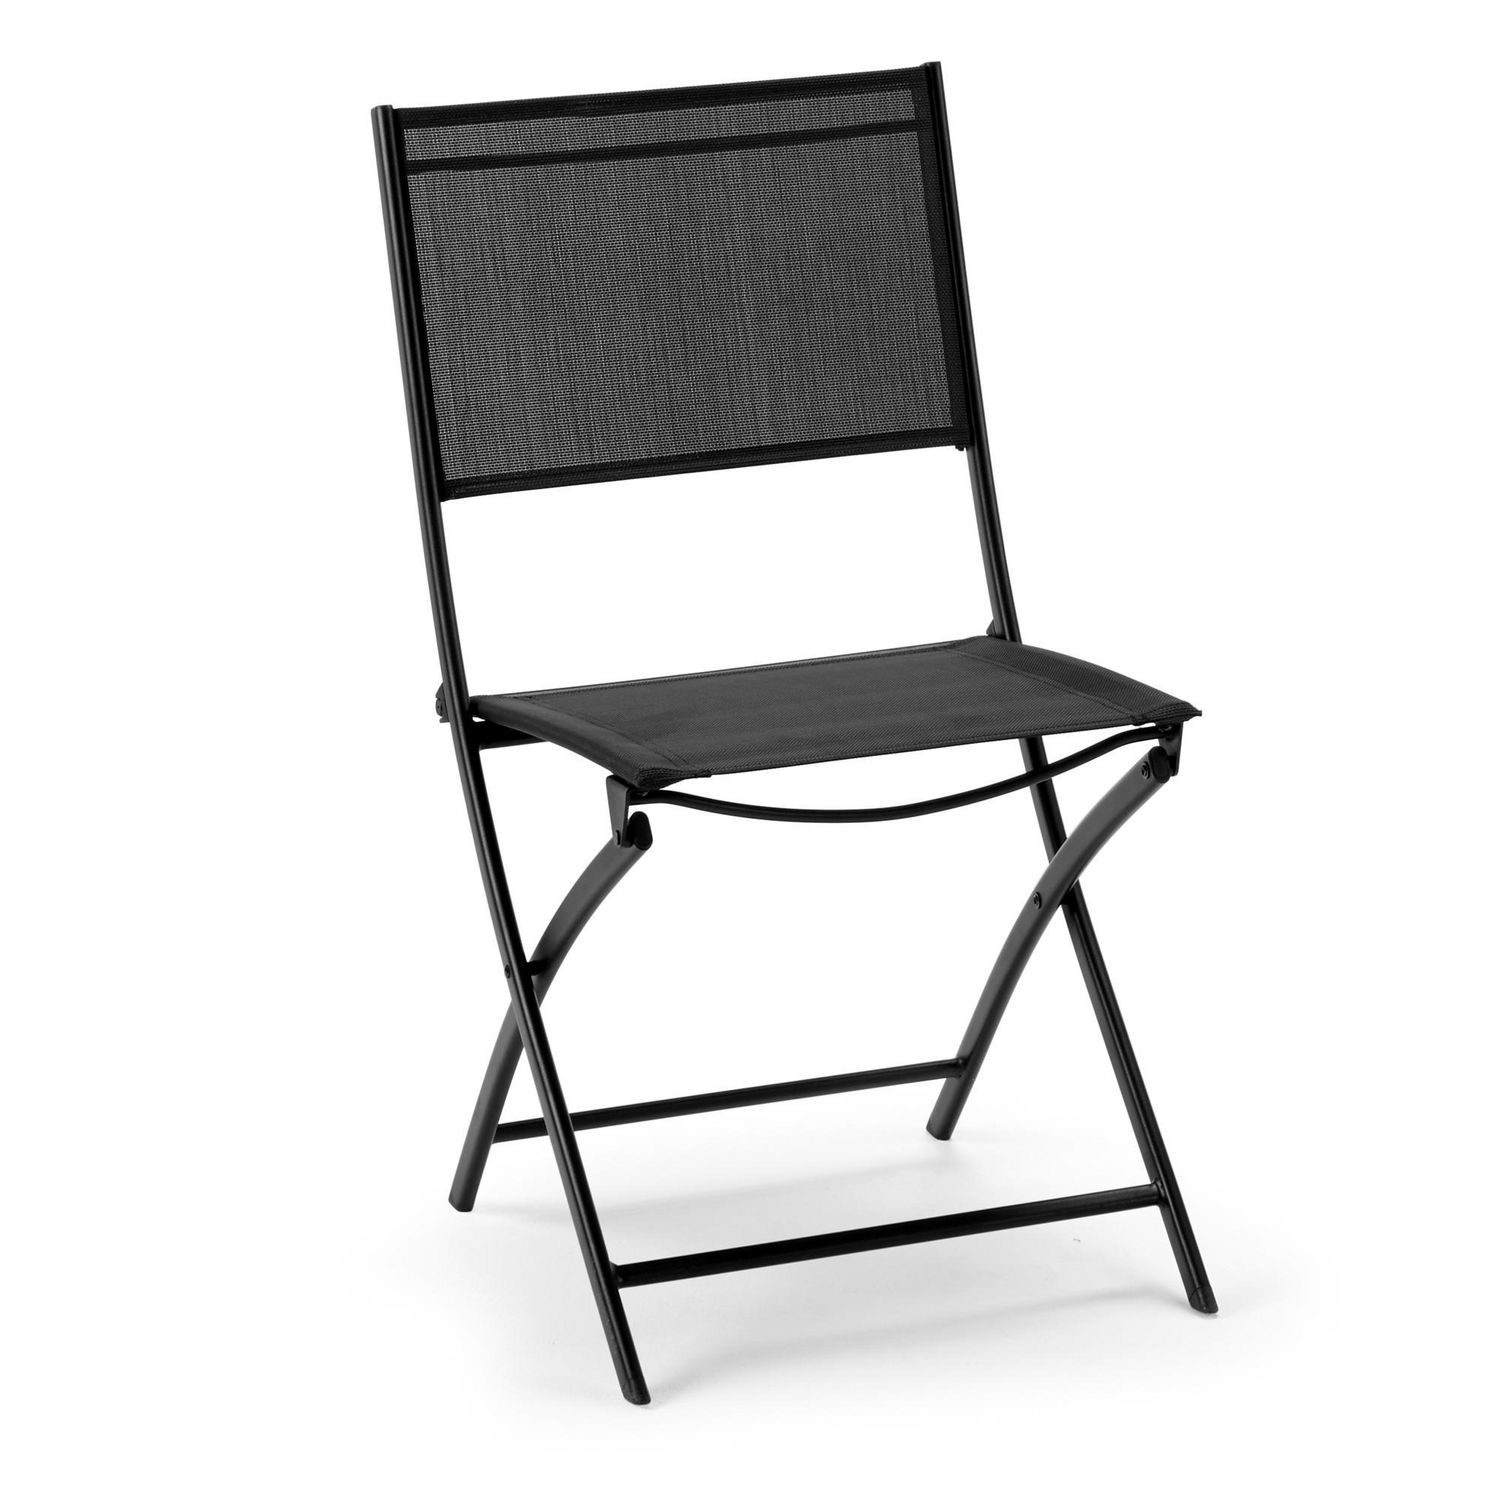 Coleman Sling Chair review: a stylish chair that's built for relaxing